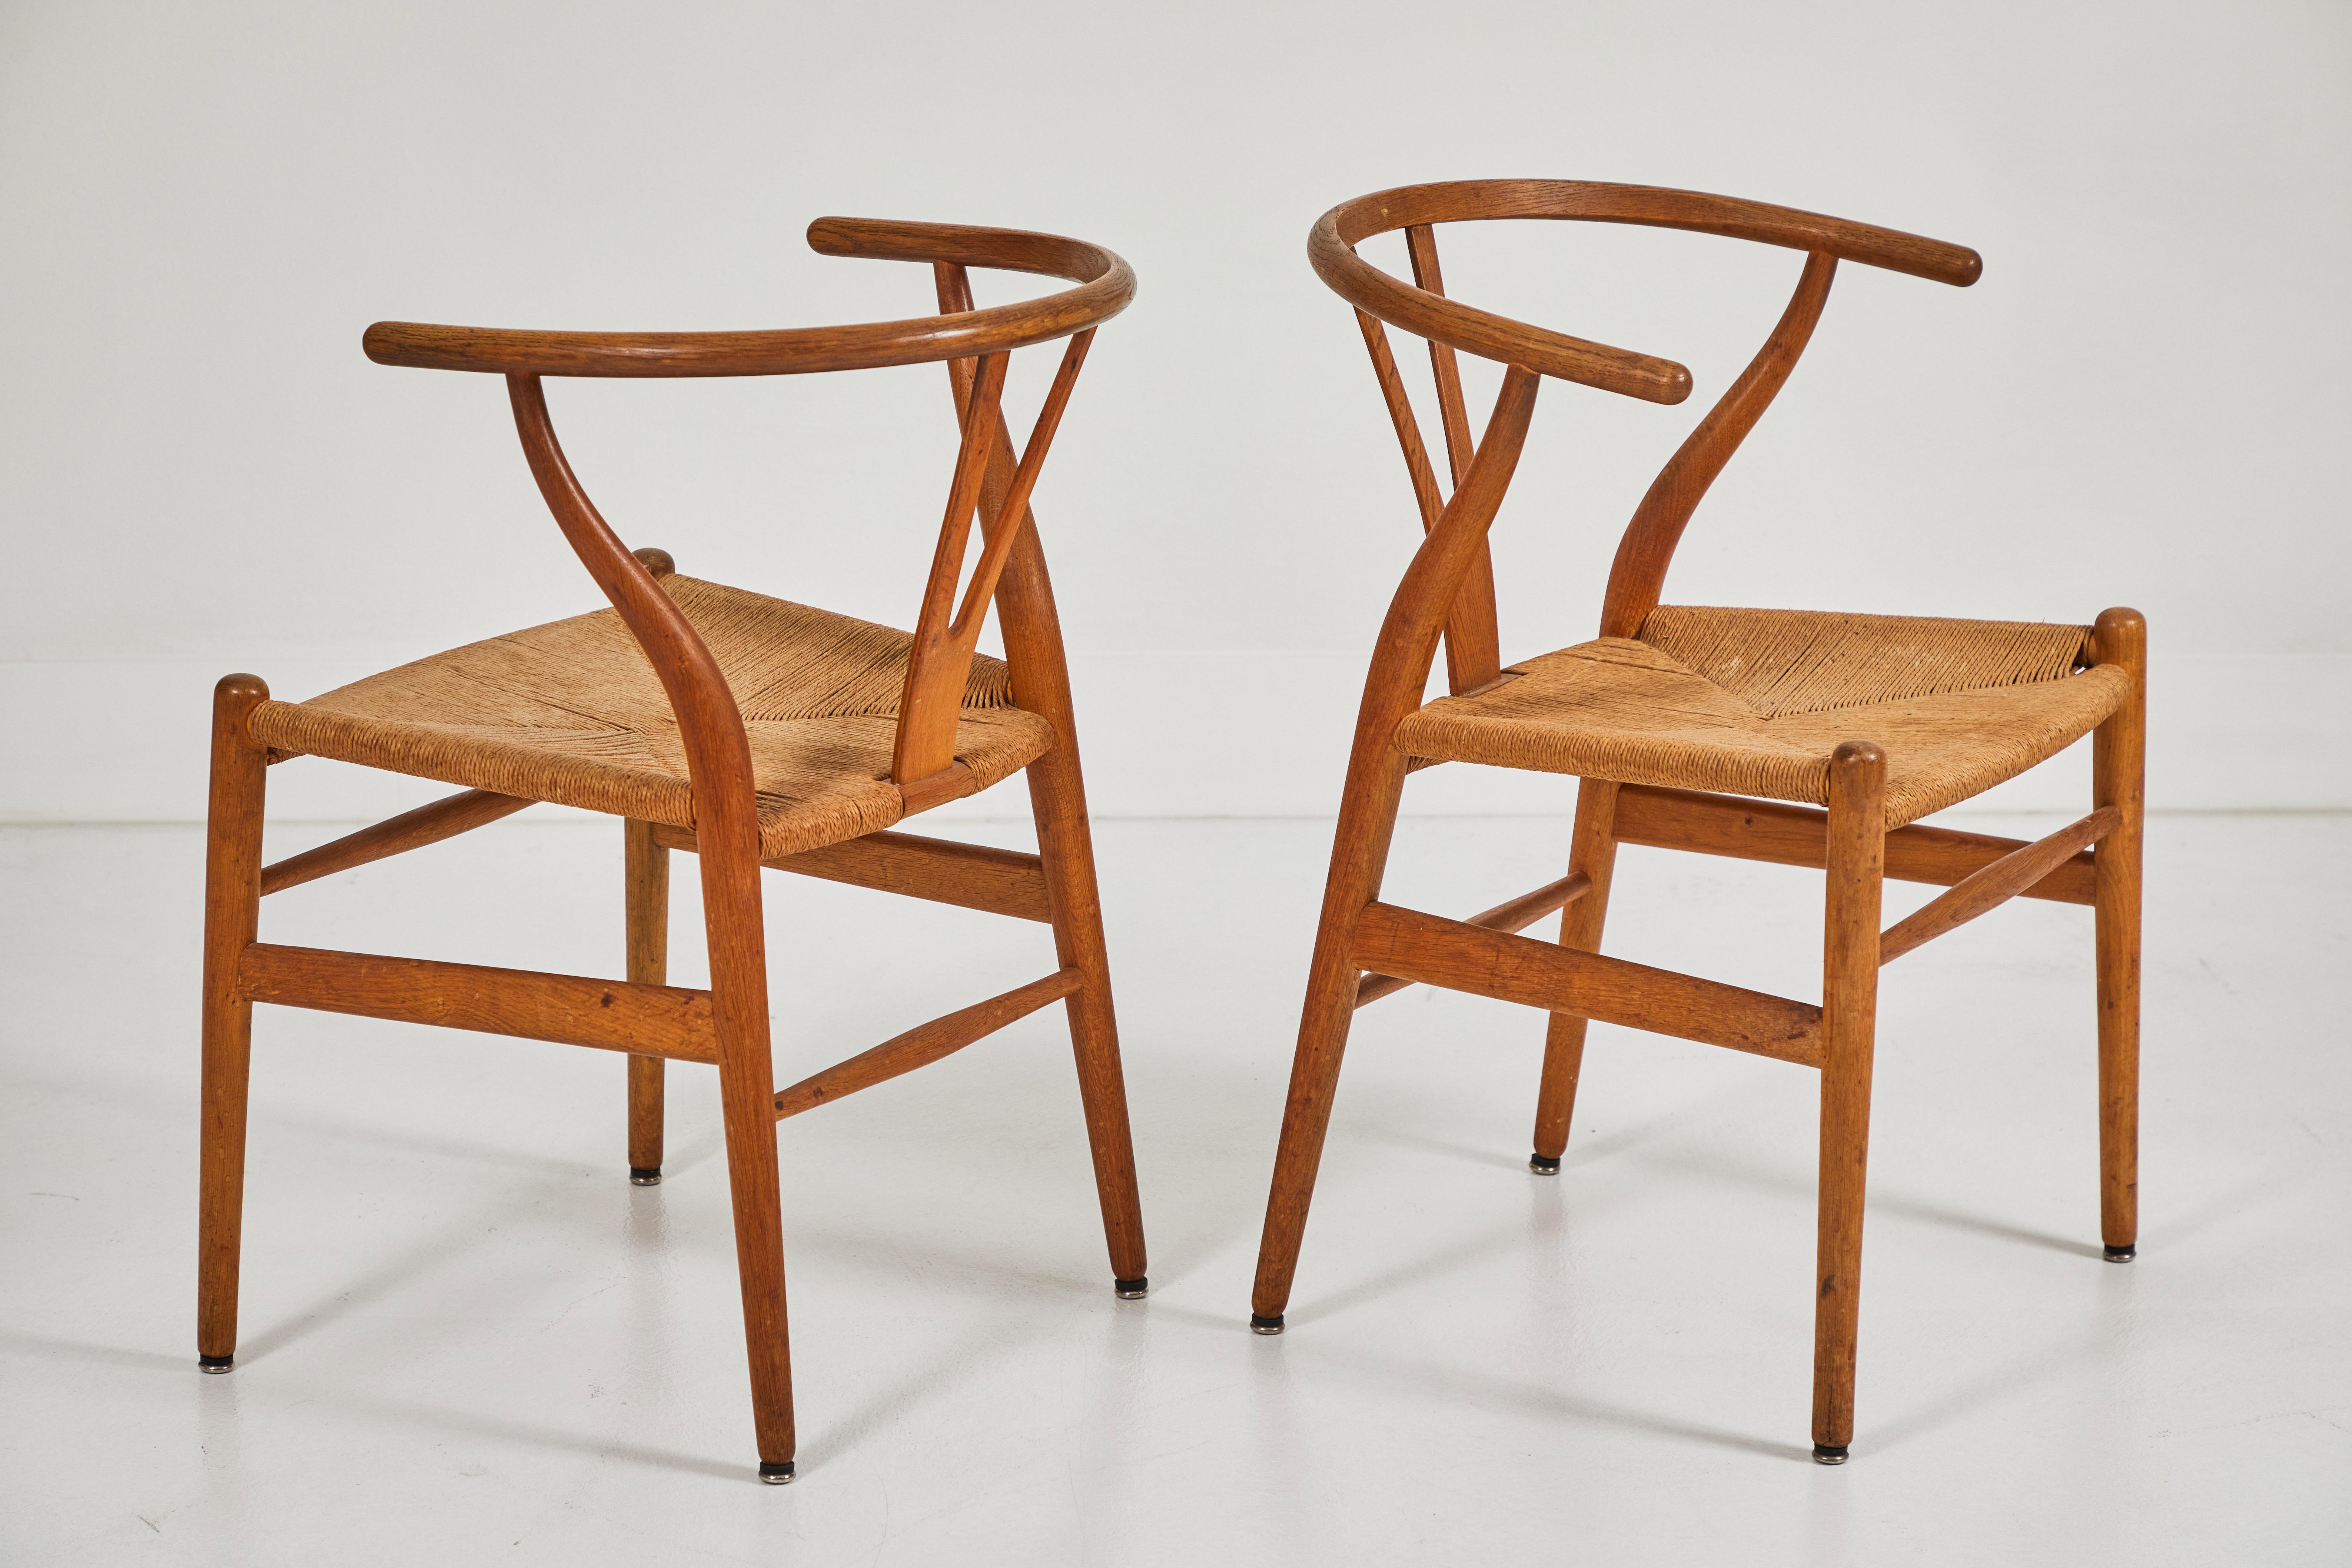 Named after the wishbone shaped back rest, these chairs attributed to Hans Wegner exemplify mid-century danish modern furniture. The simplicity combined with functionality is an excellent example of the aesthetics of Danish furniture. The arms are